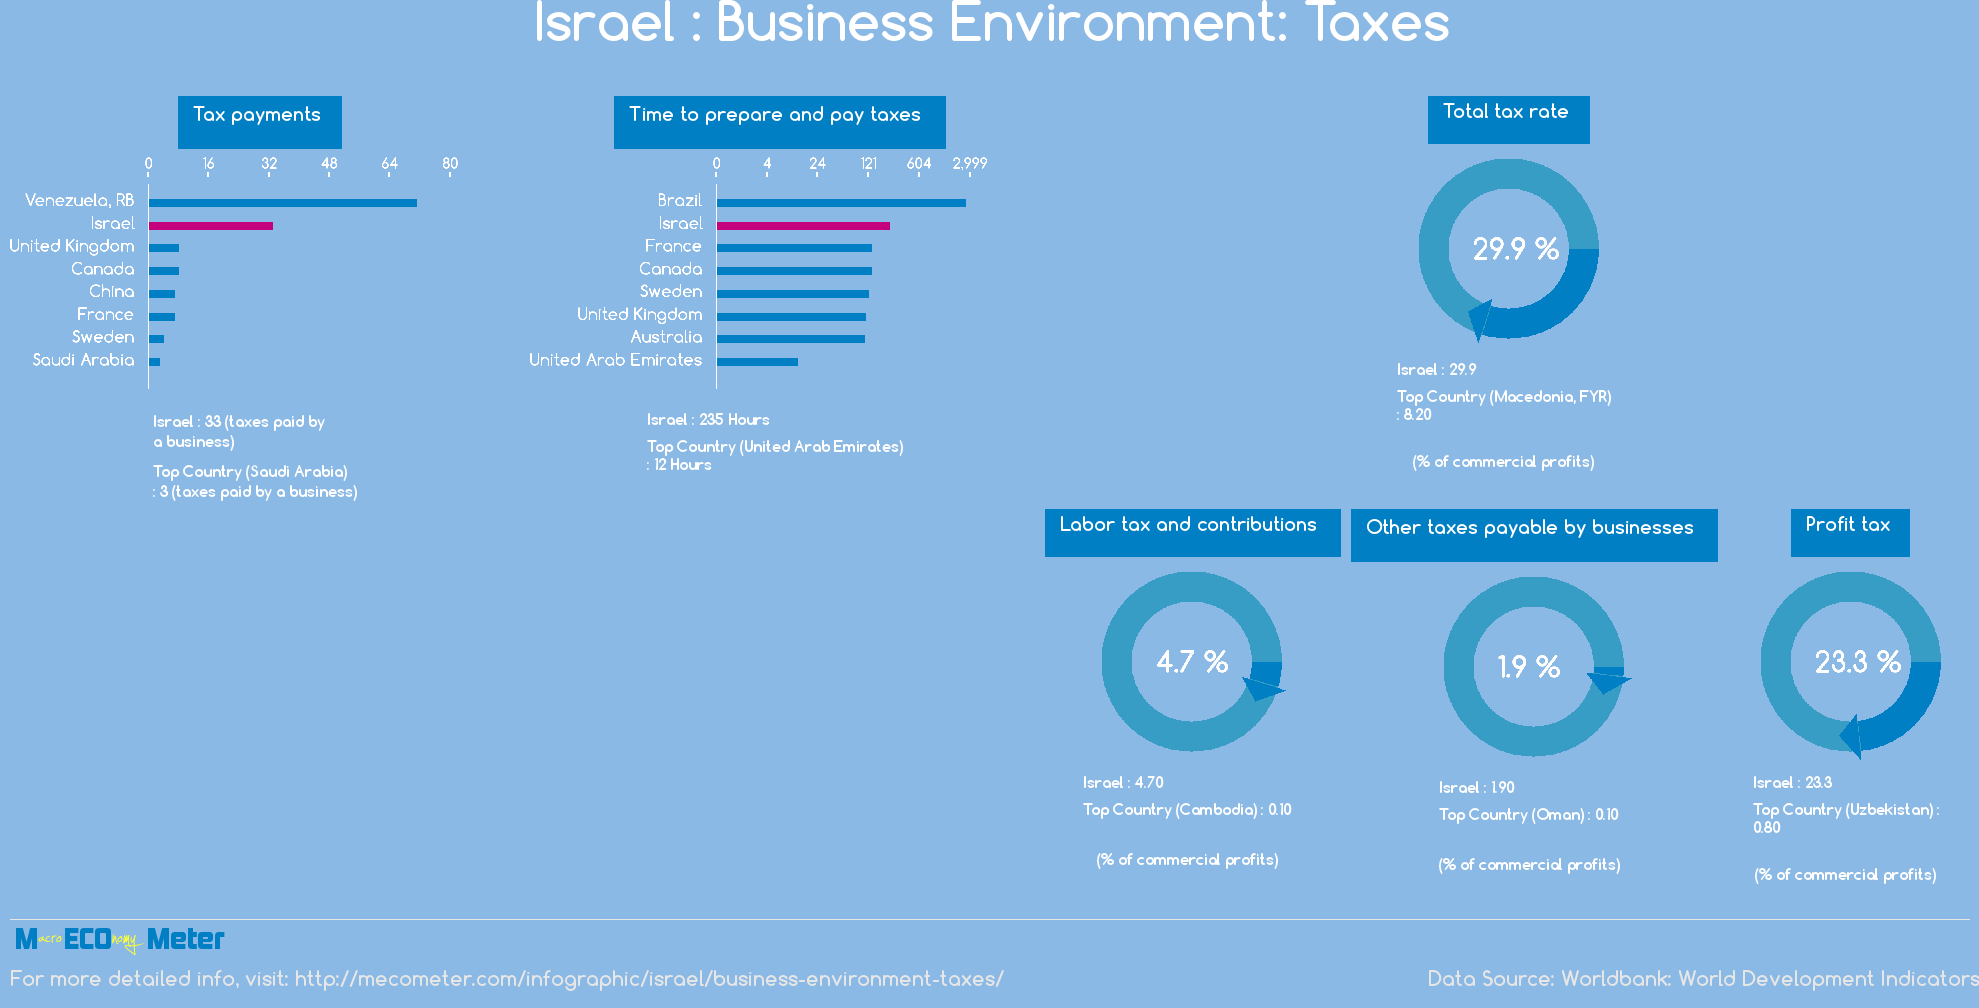 Israel : Business Environment: Taxes